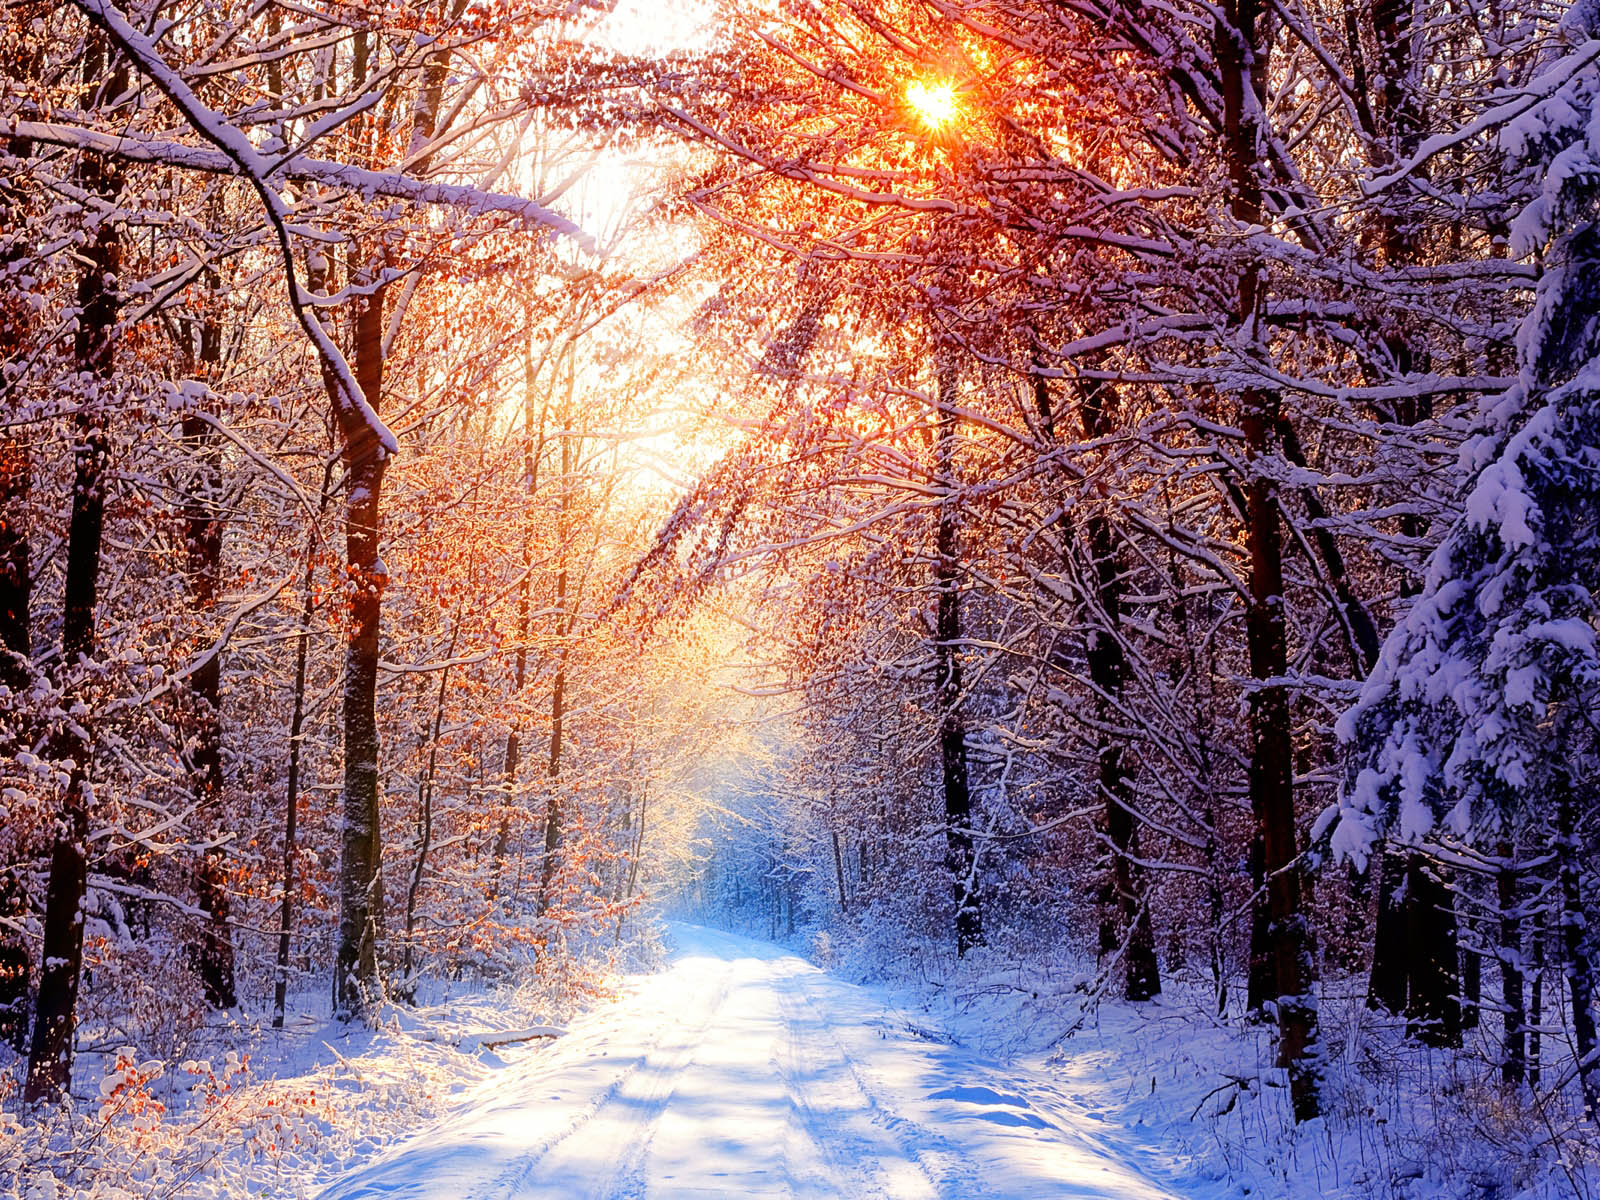 Winter Background Wallpaper - NawPic